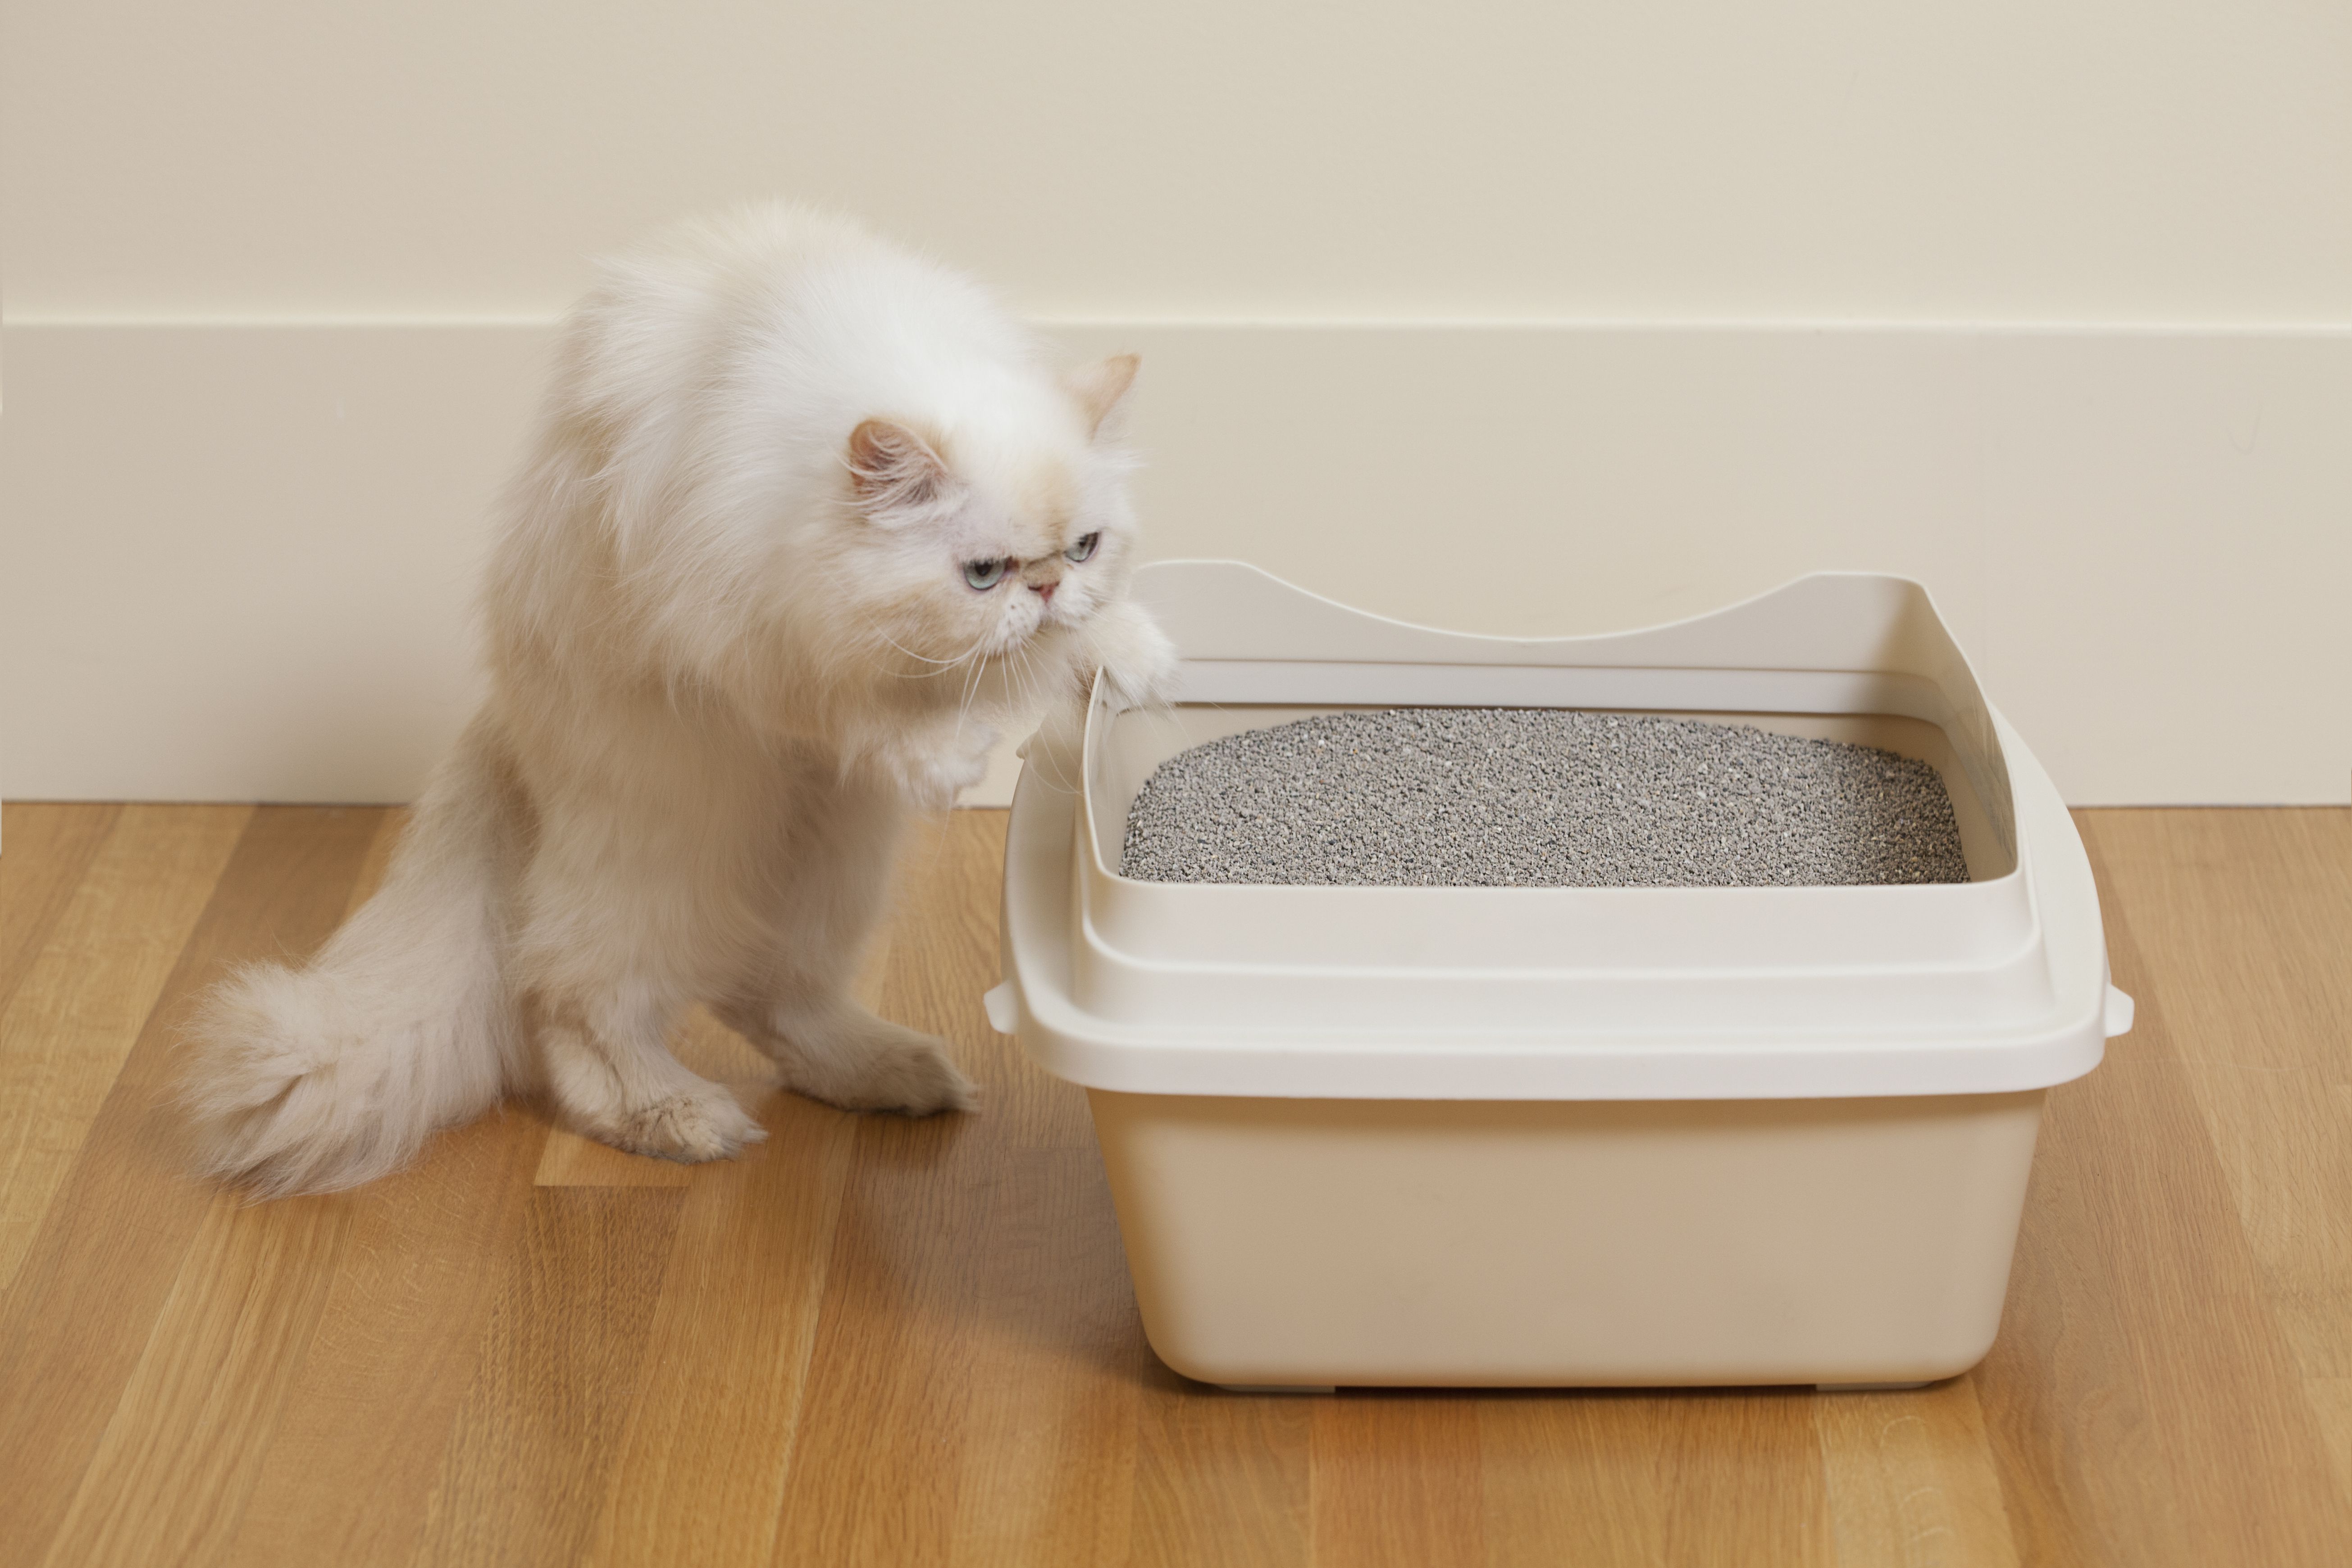 Persian cat sniffing and entering litter box